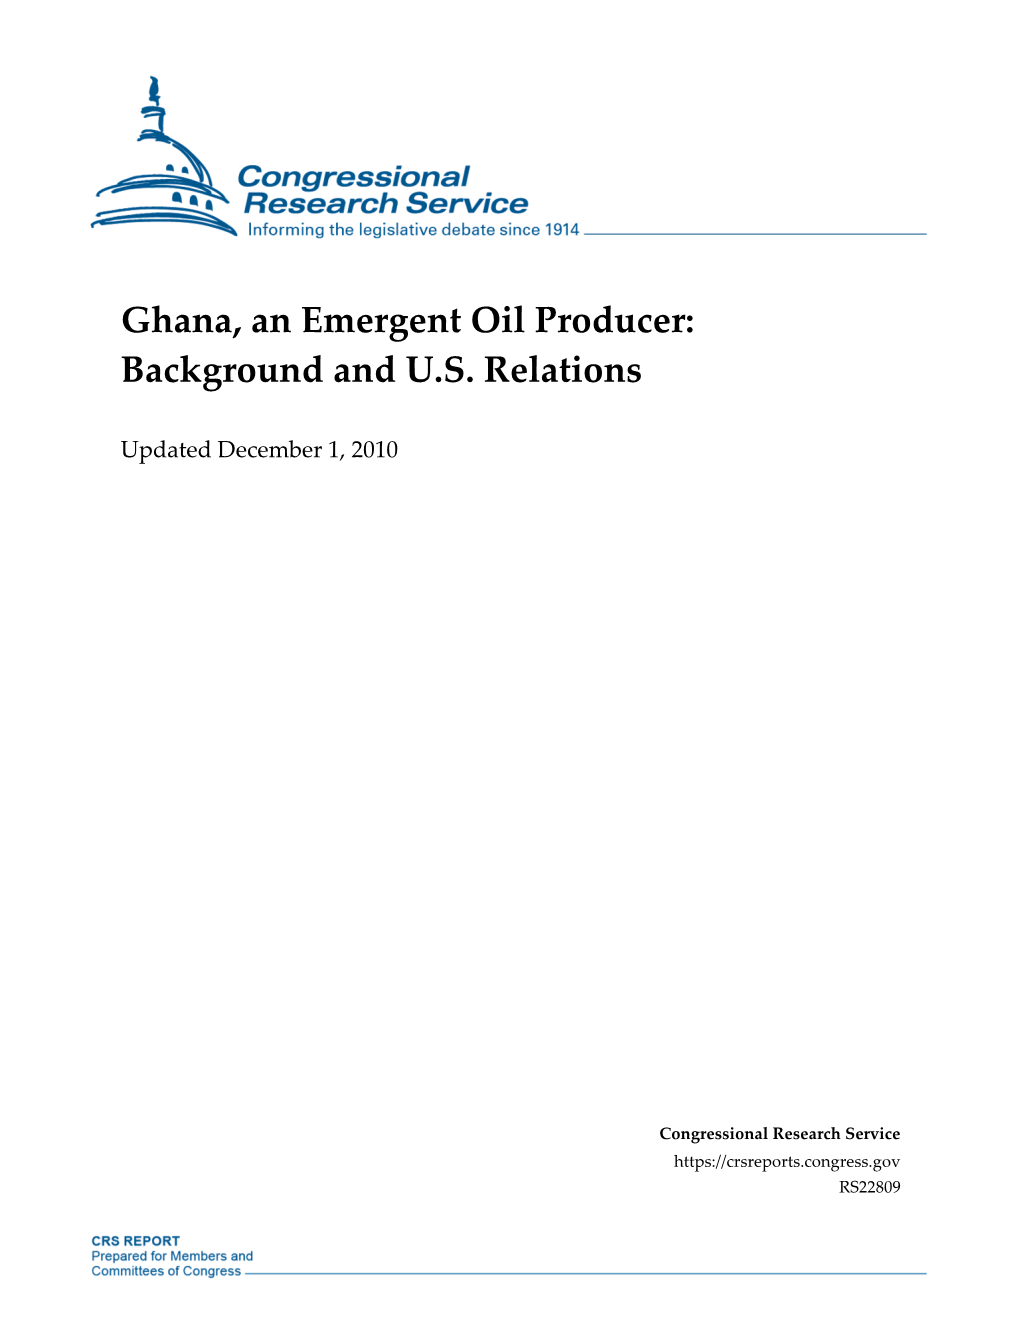 Ghana, an Emergent Oil Producer: Background and U.S